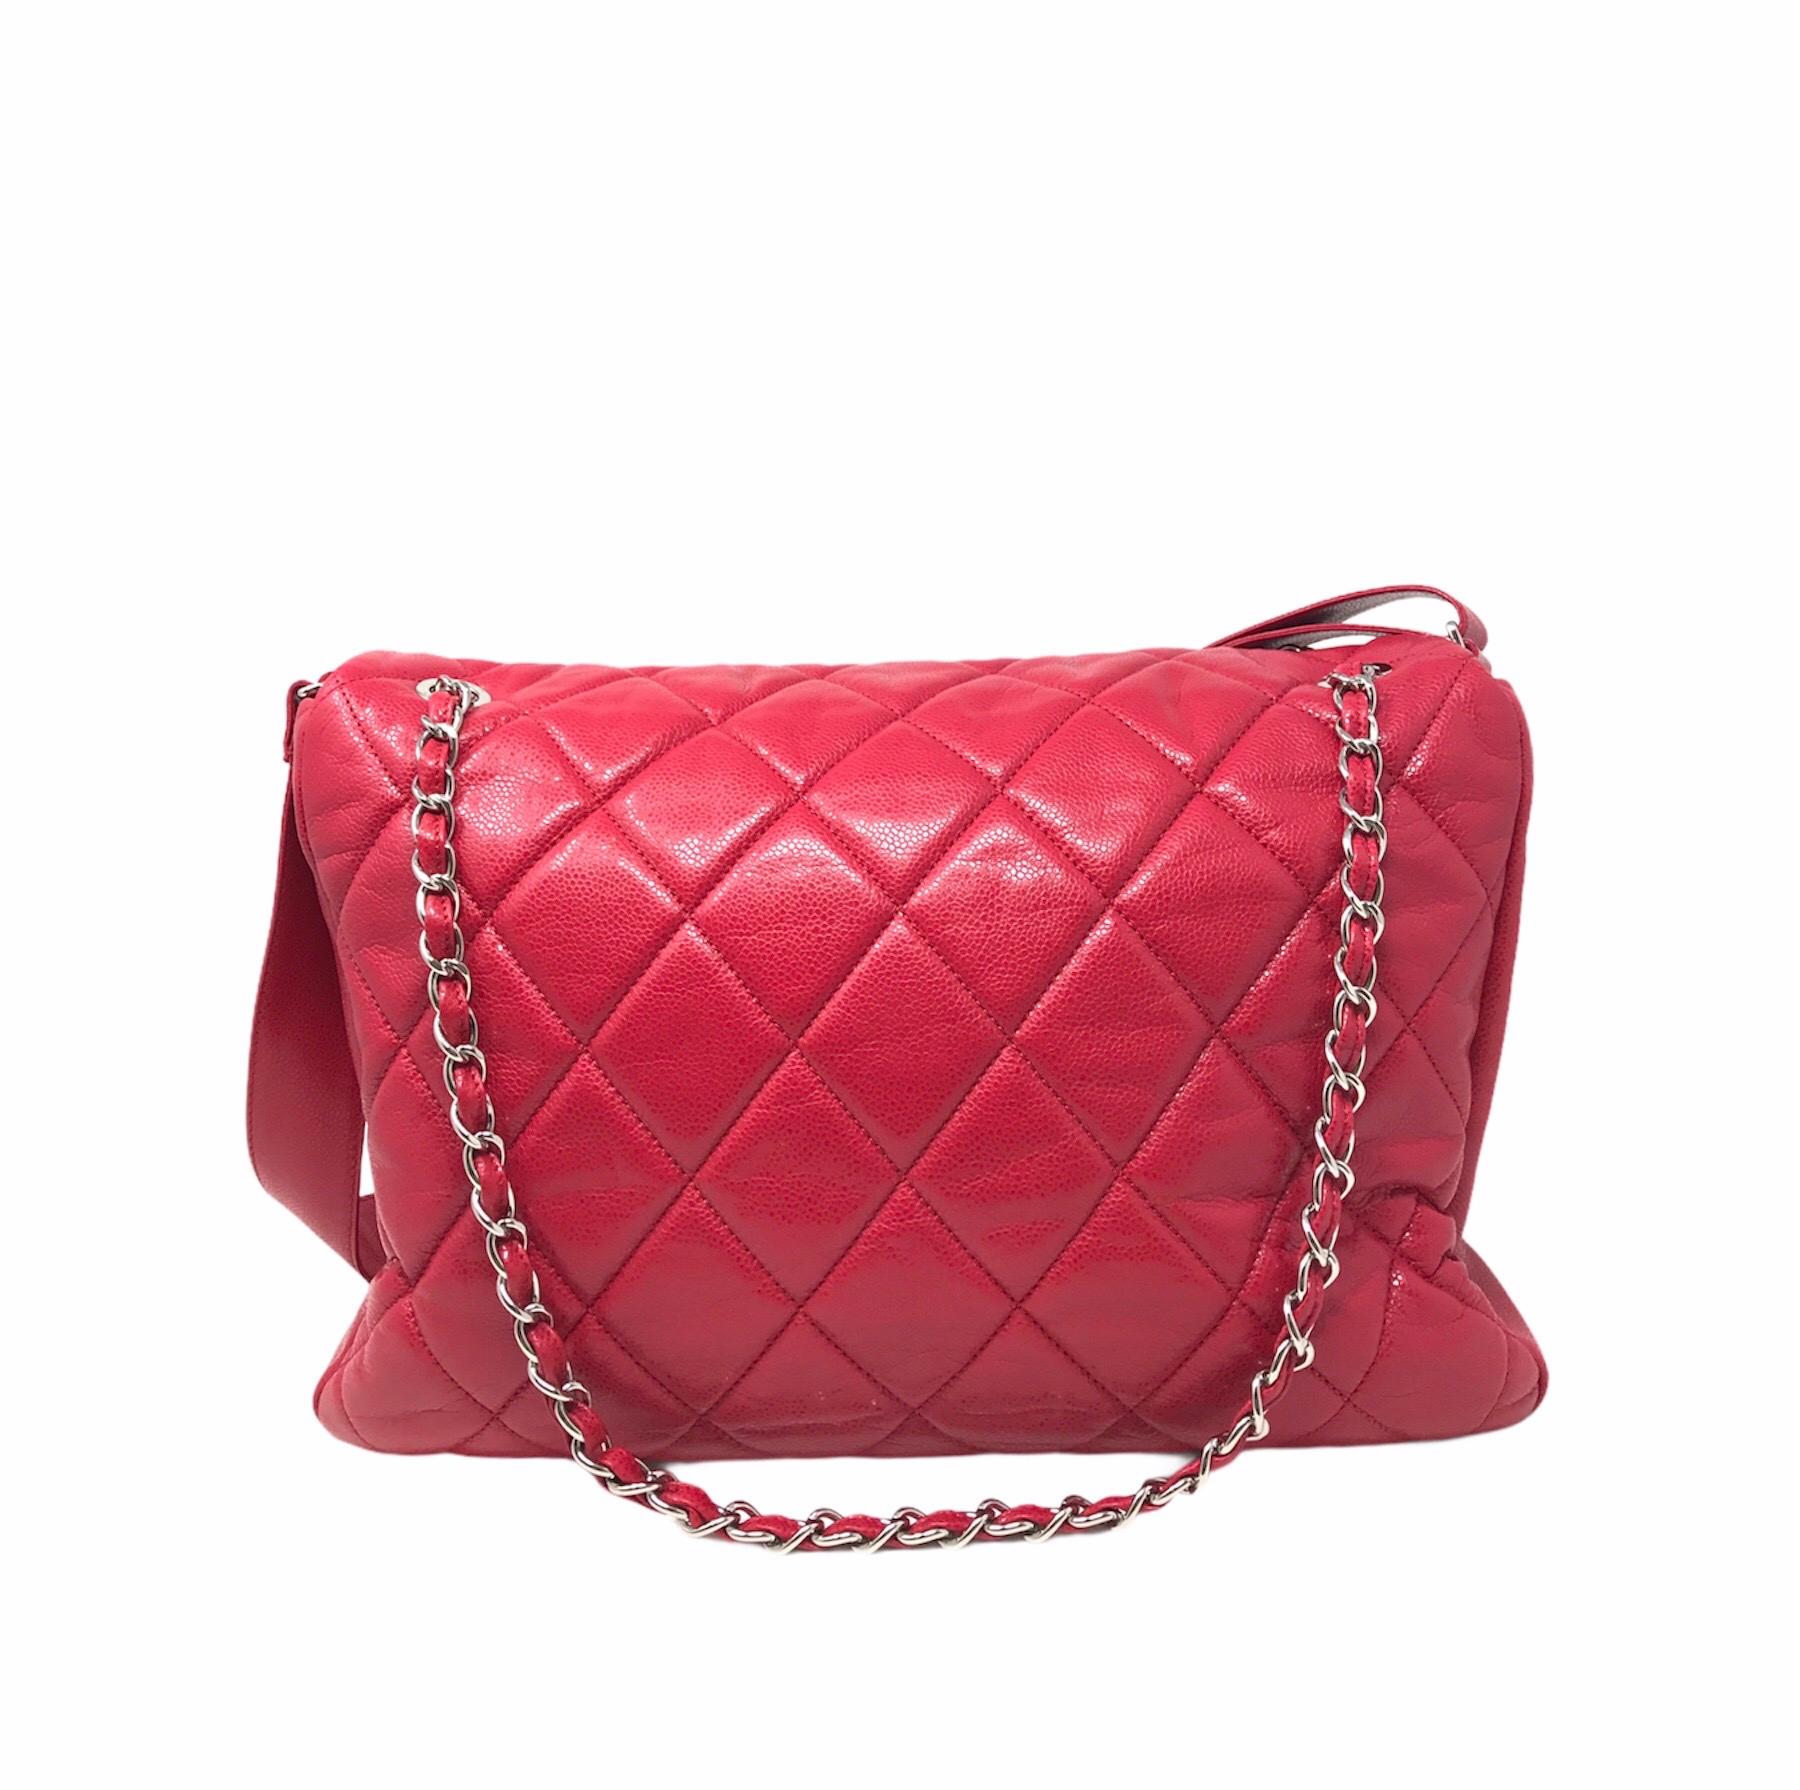 Chanel XXL bag in strawberry red caviar leather, excellent condition, cream-colored fabric interior 3 compartments, zip pocket, Hdw silver. Double CC Snap button closure.
Double shoulder strap in leather or chain
It can be worn on the shoulder or